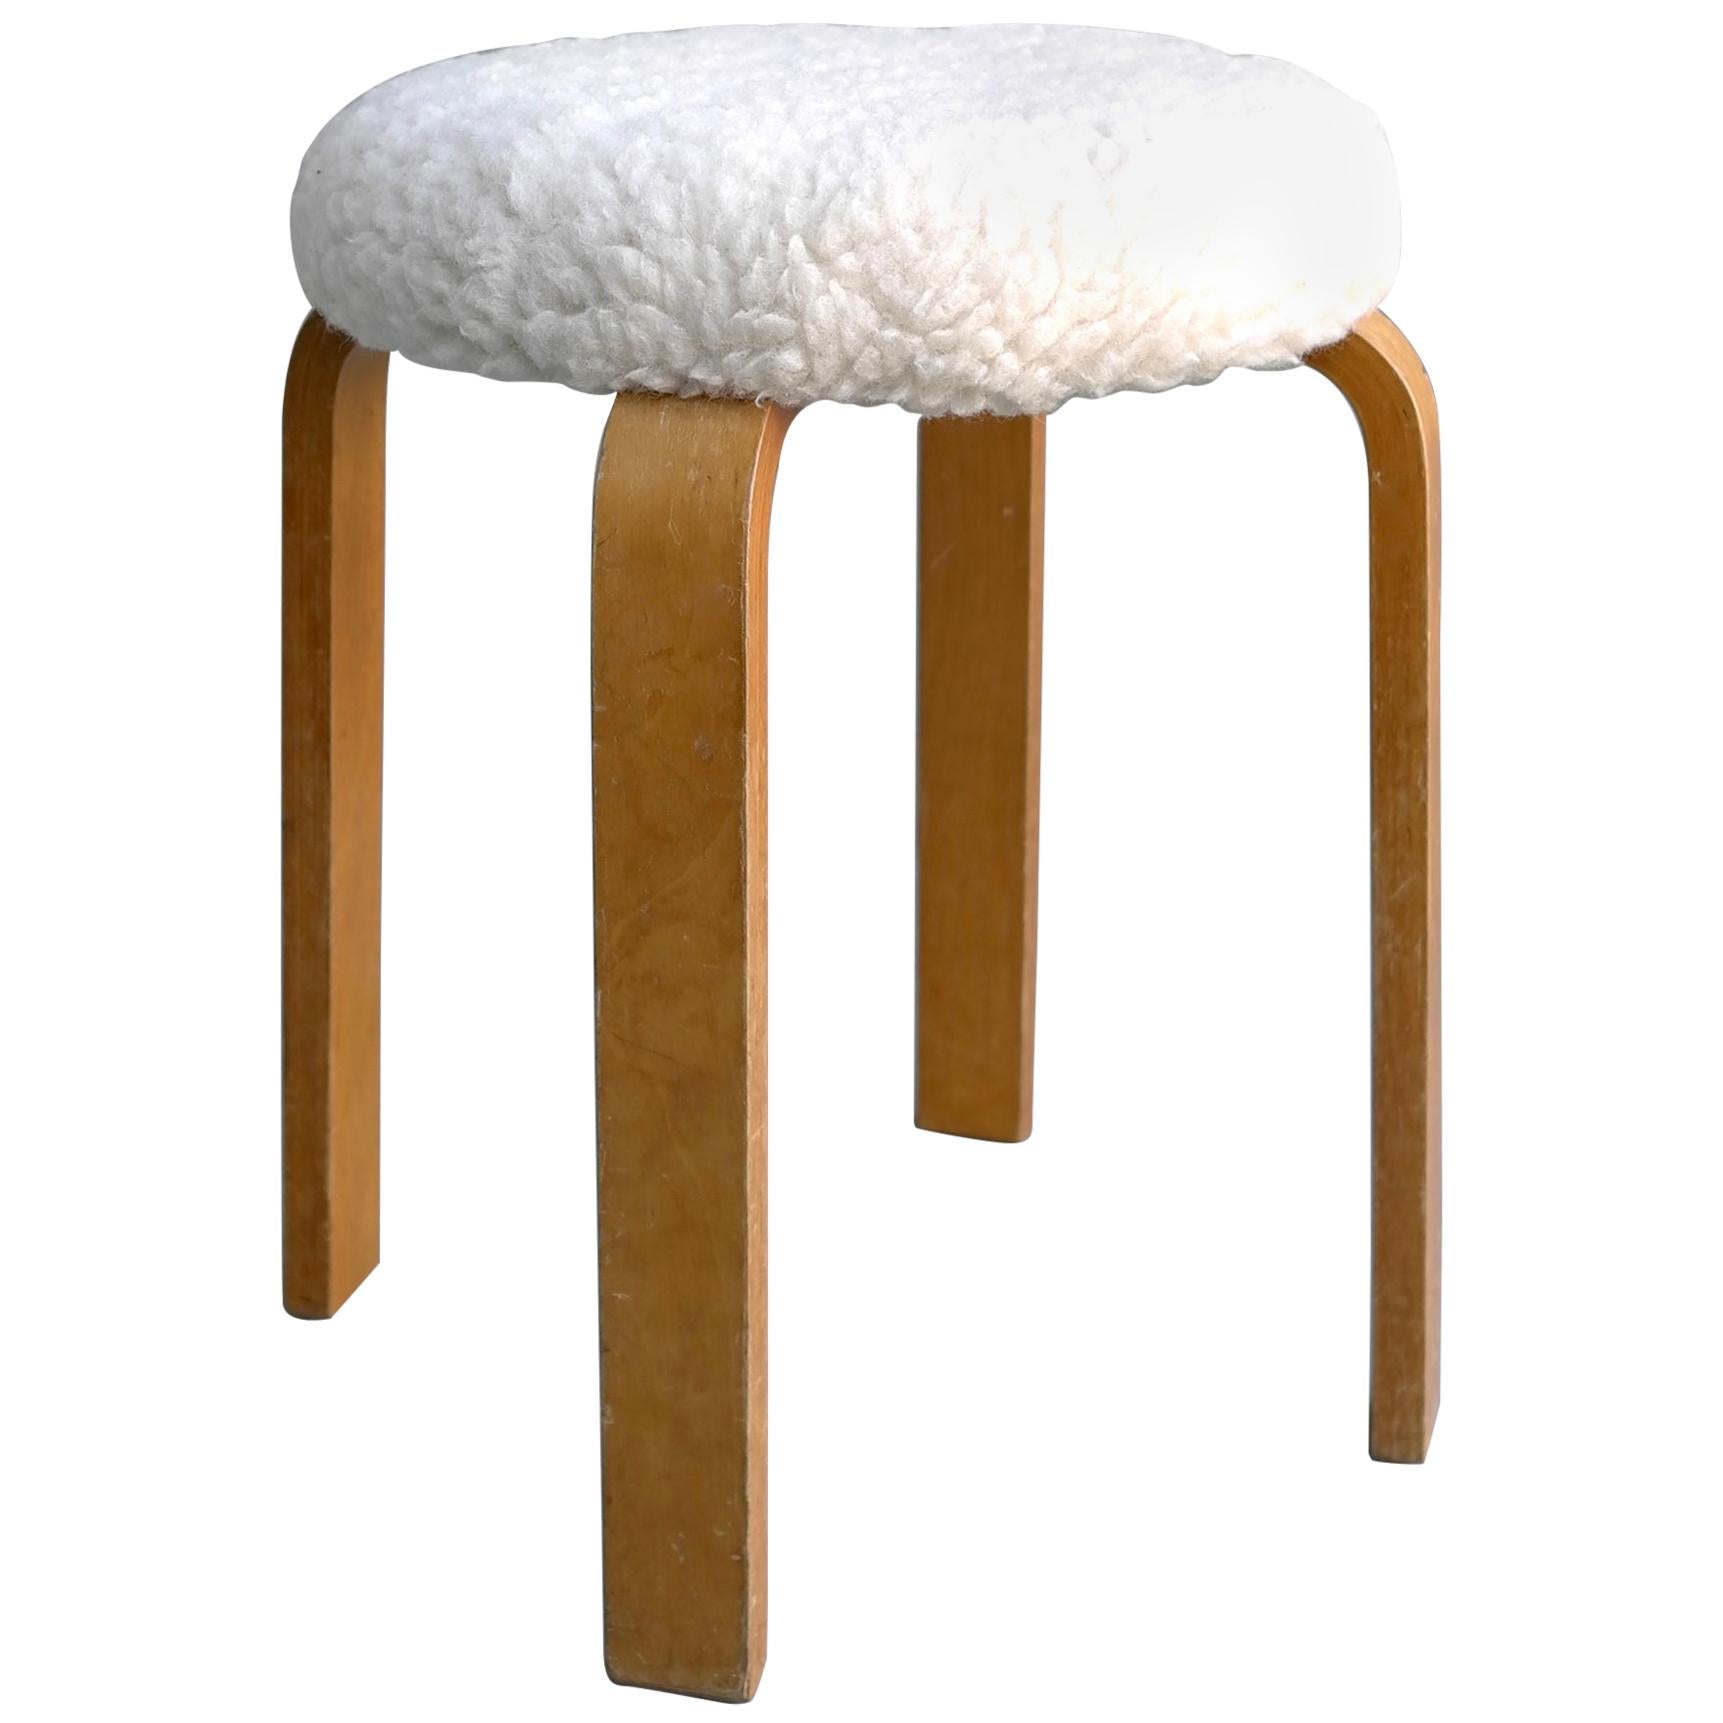 Merino Wool and Birch Plywood Stool by Cor Alons for Gouda Den Boer, 1955 For Sale